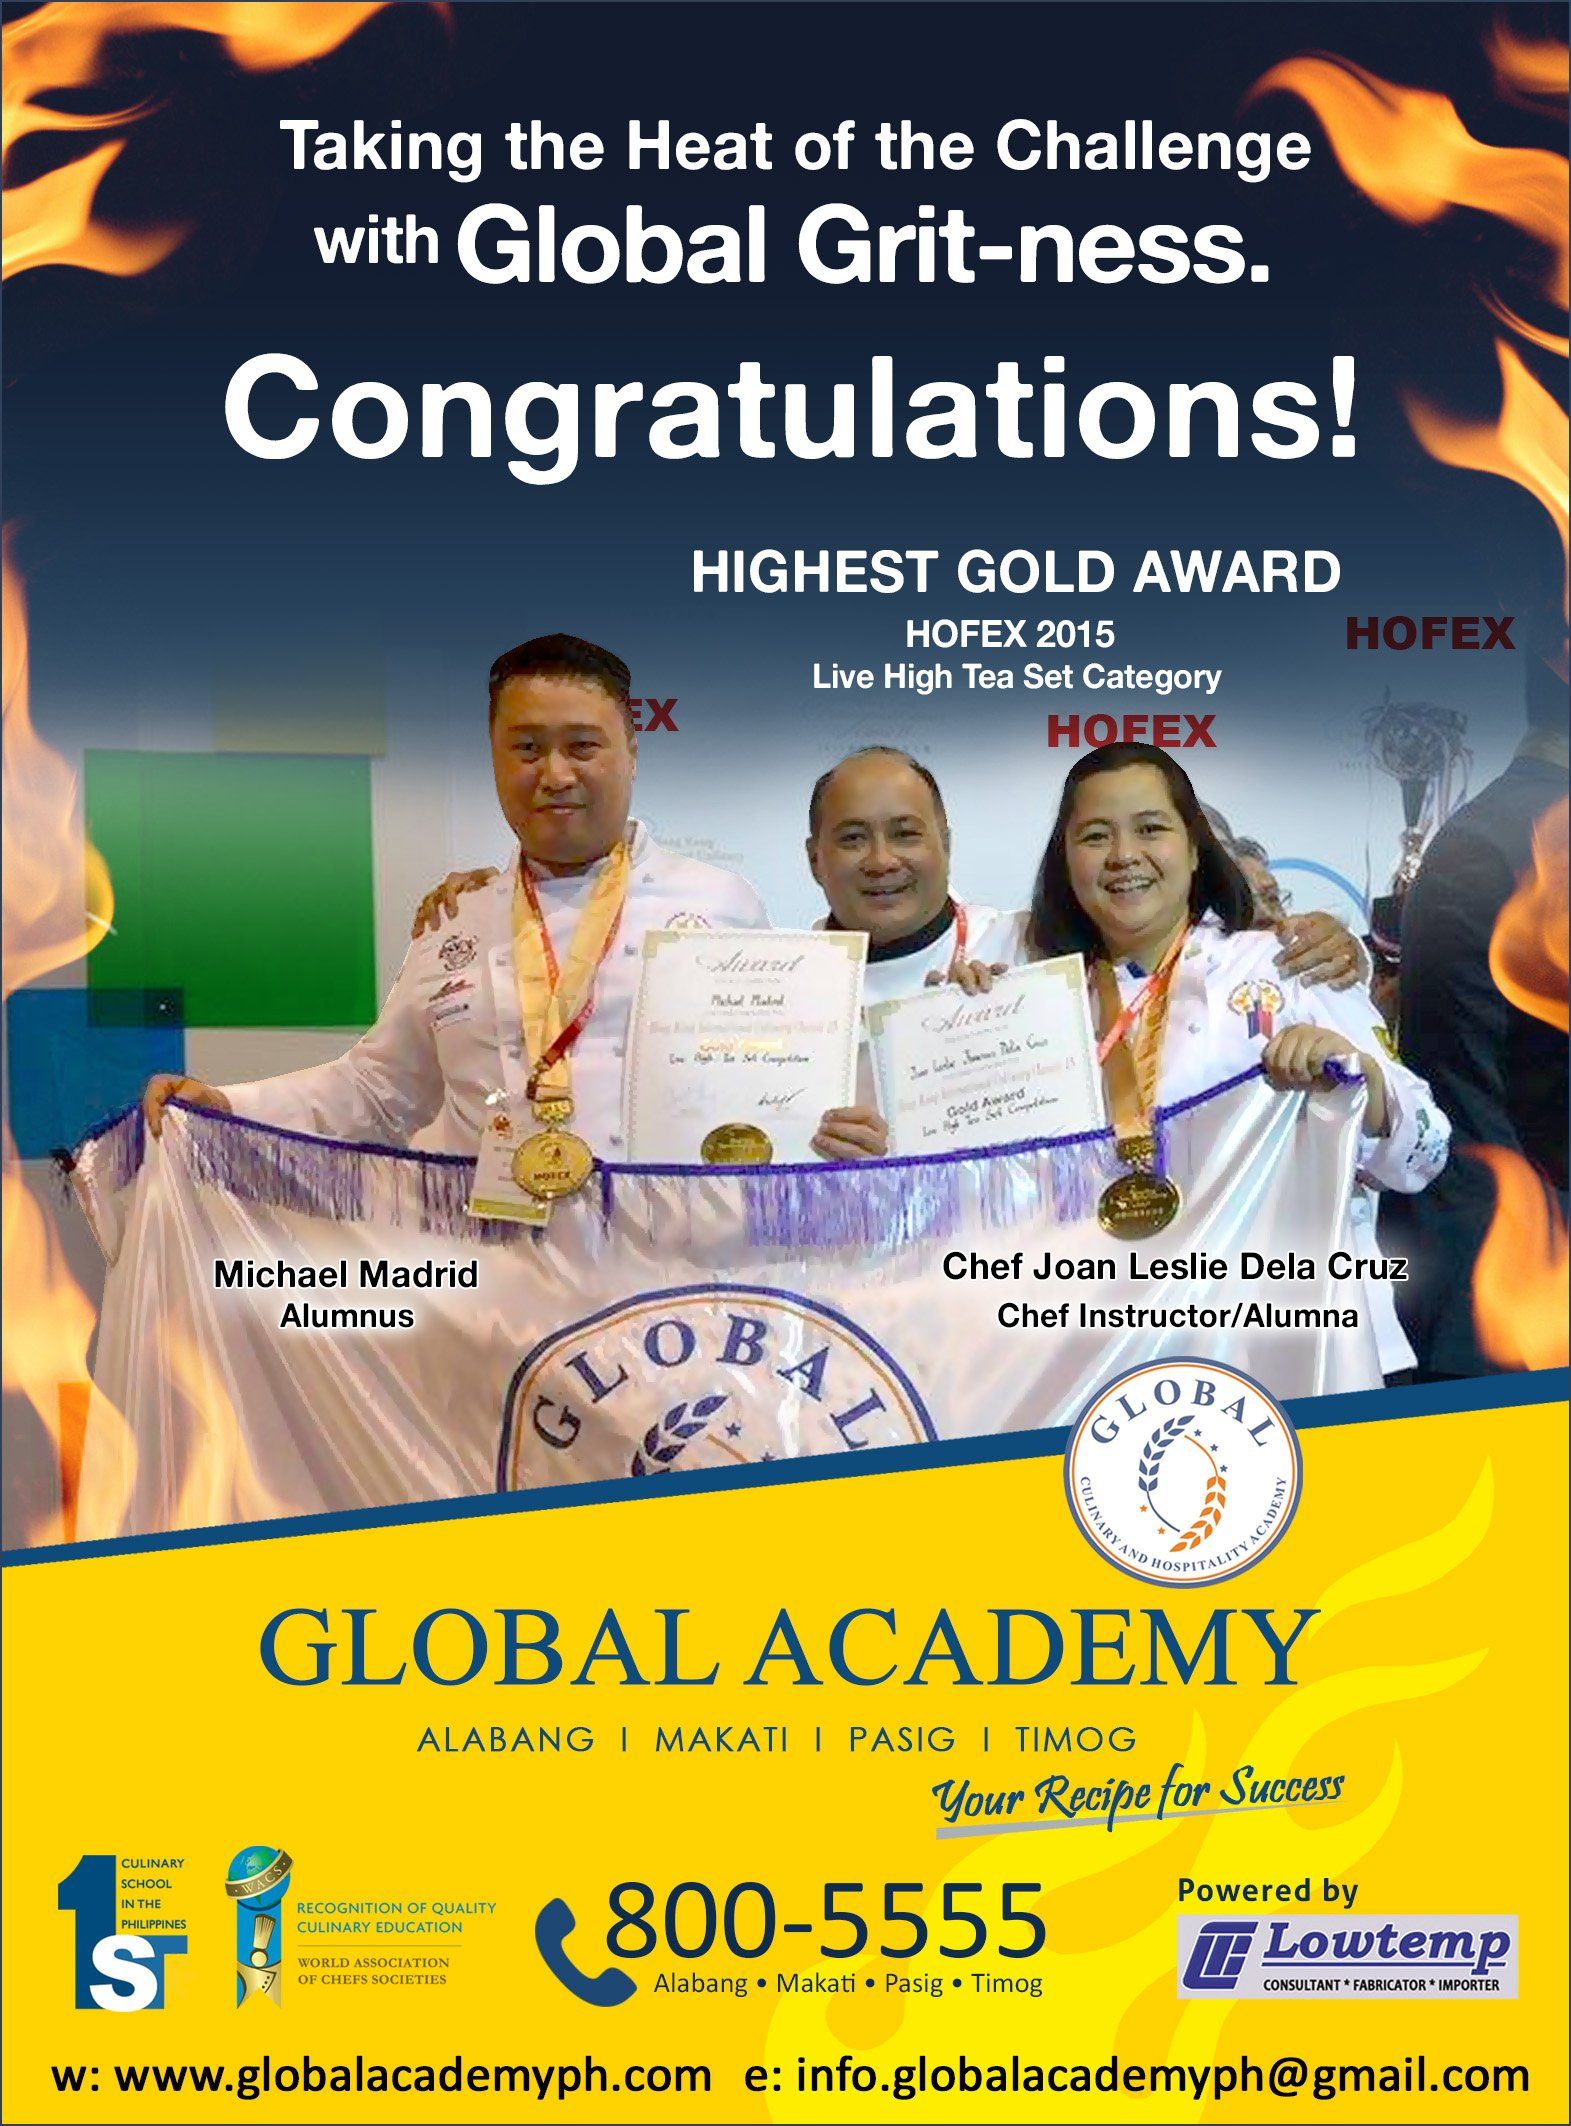 'Global Academy' winning the Highest Gold in the Live High Tea Set Competition during the Hong Kong International Culinary Classic (HOFEX) 2015!